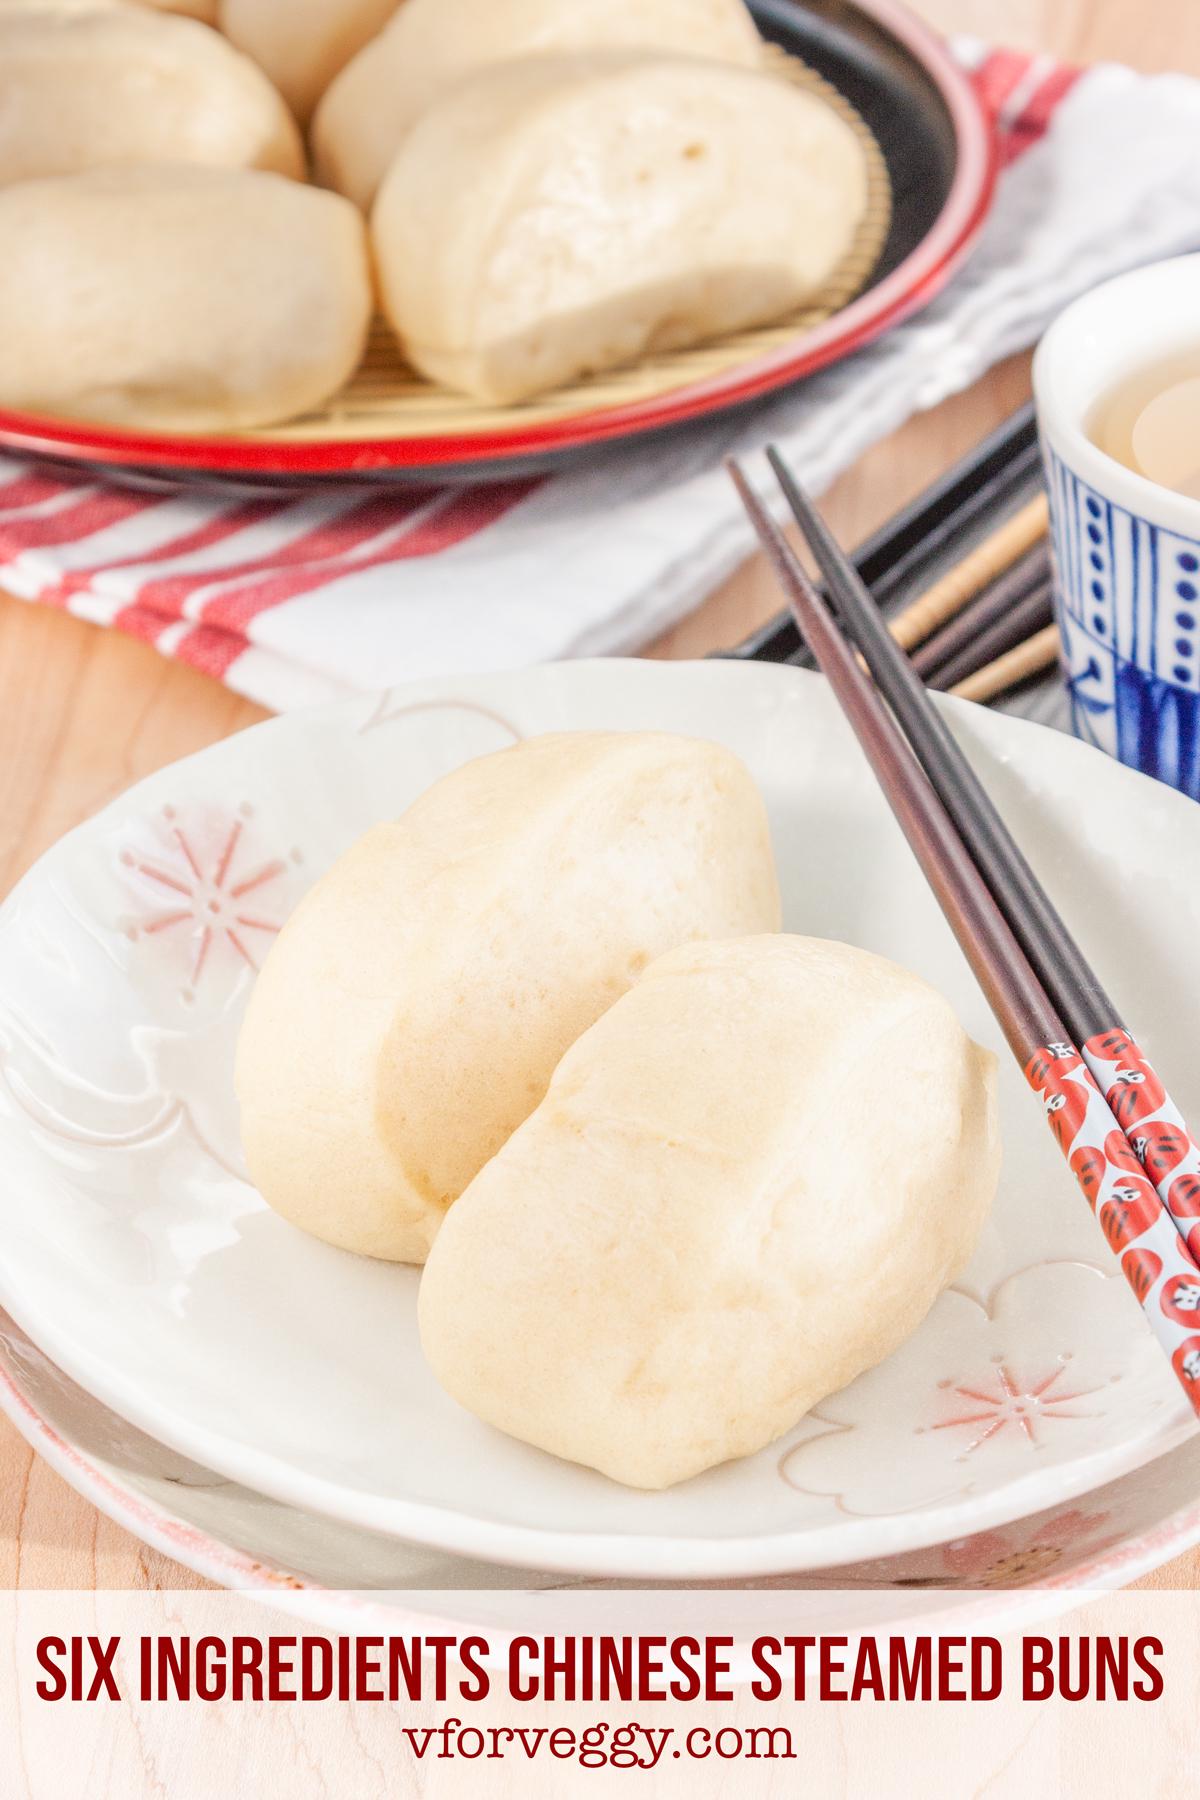 Six Ingredients Chinese Steamed Buns